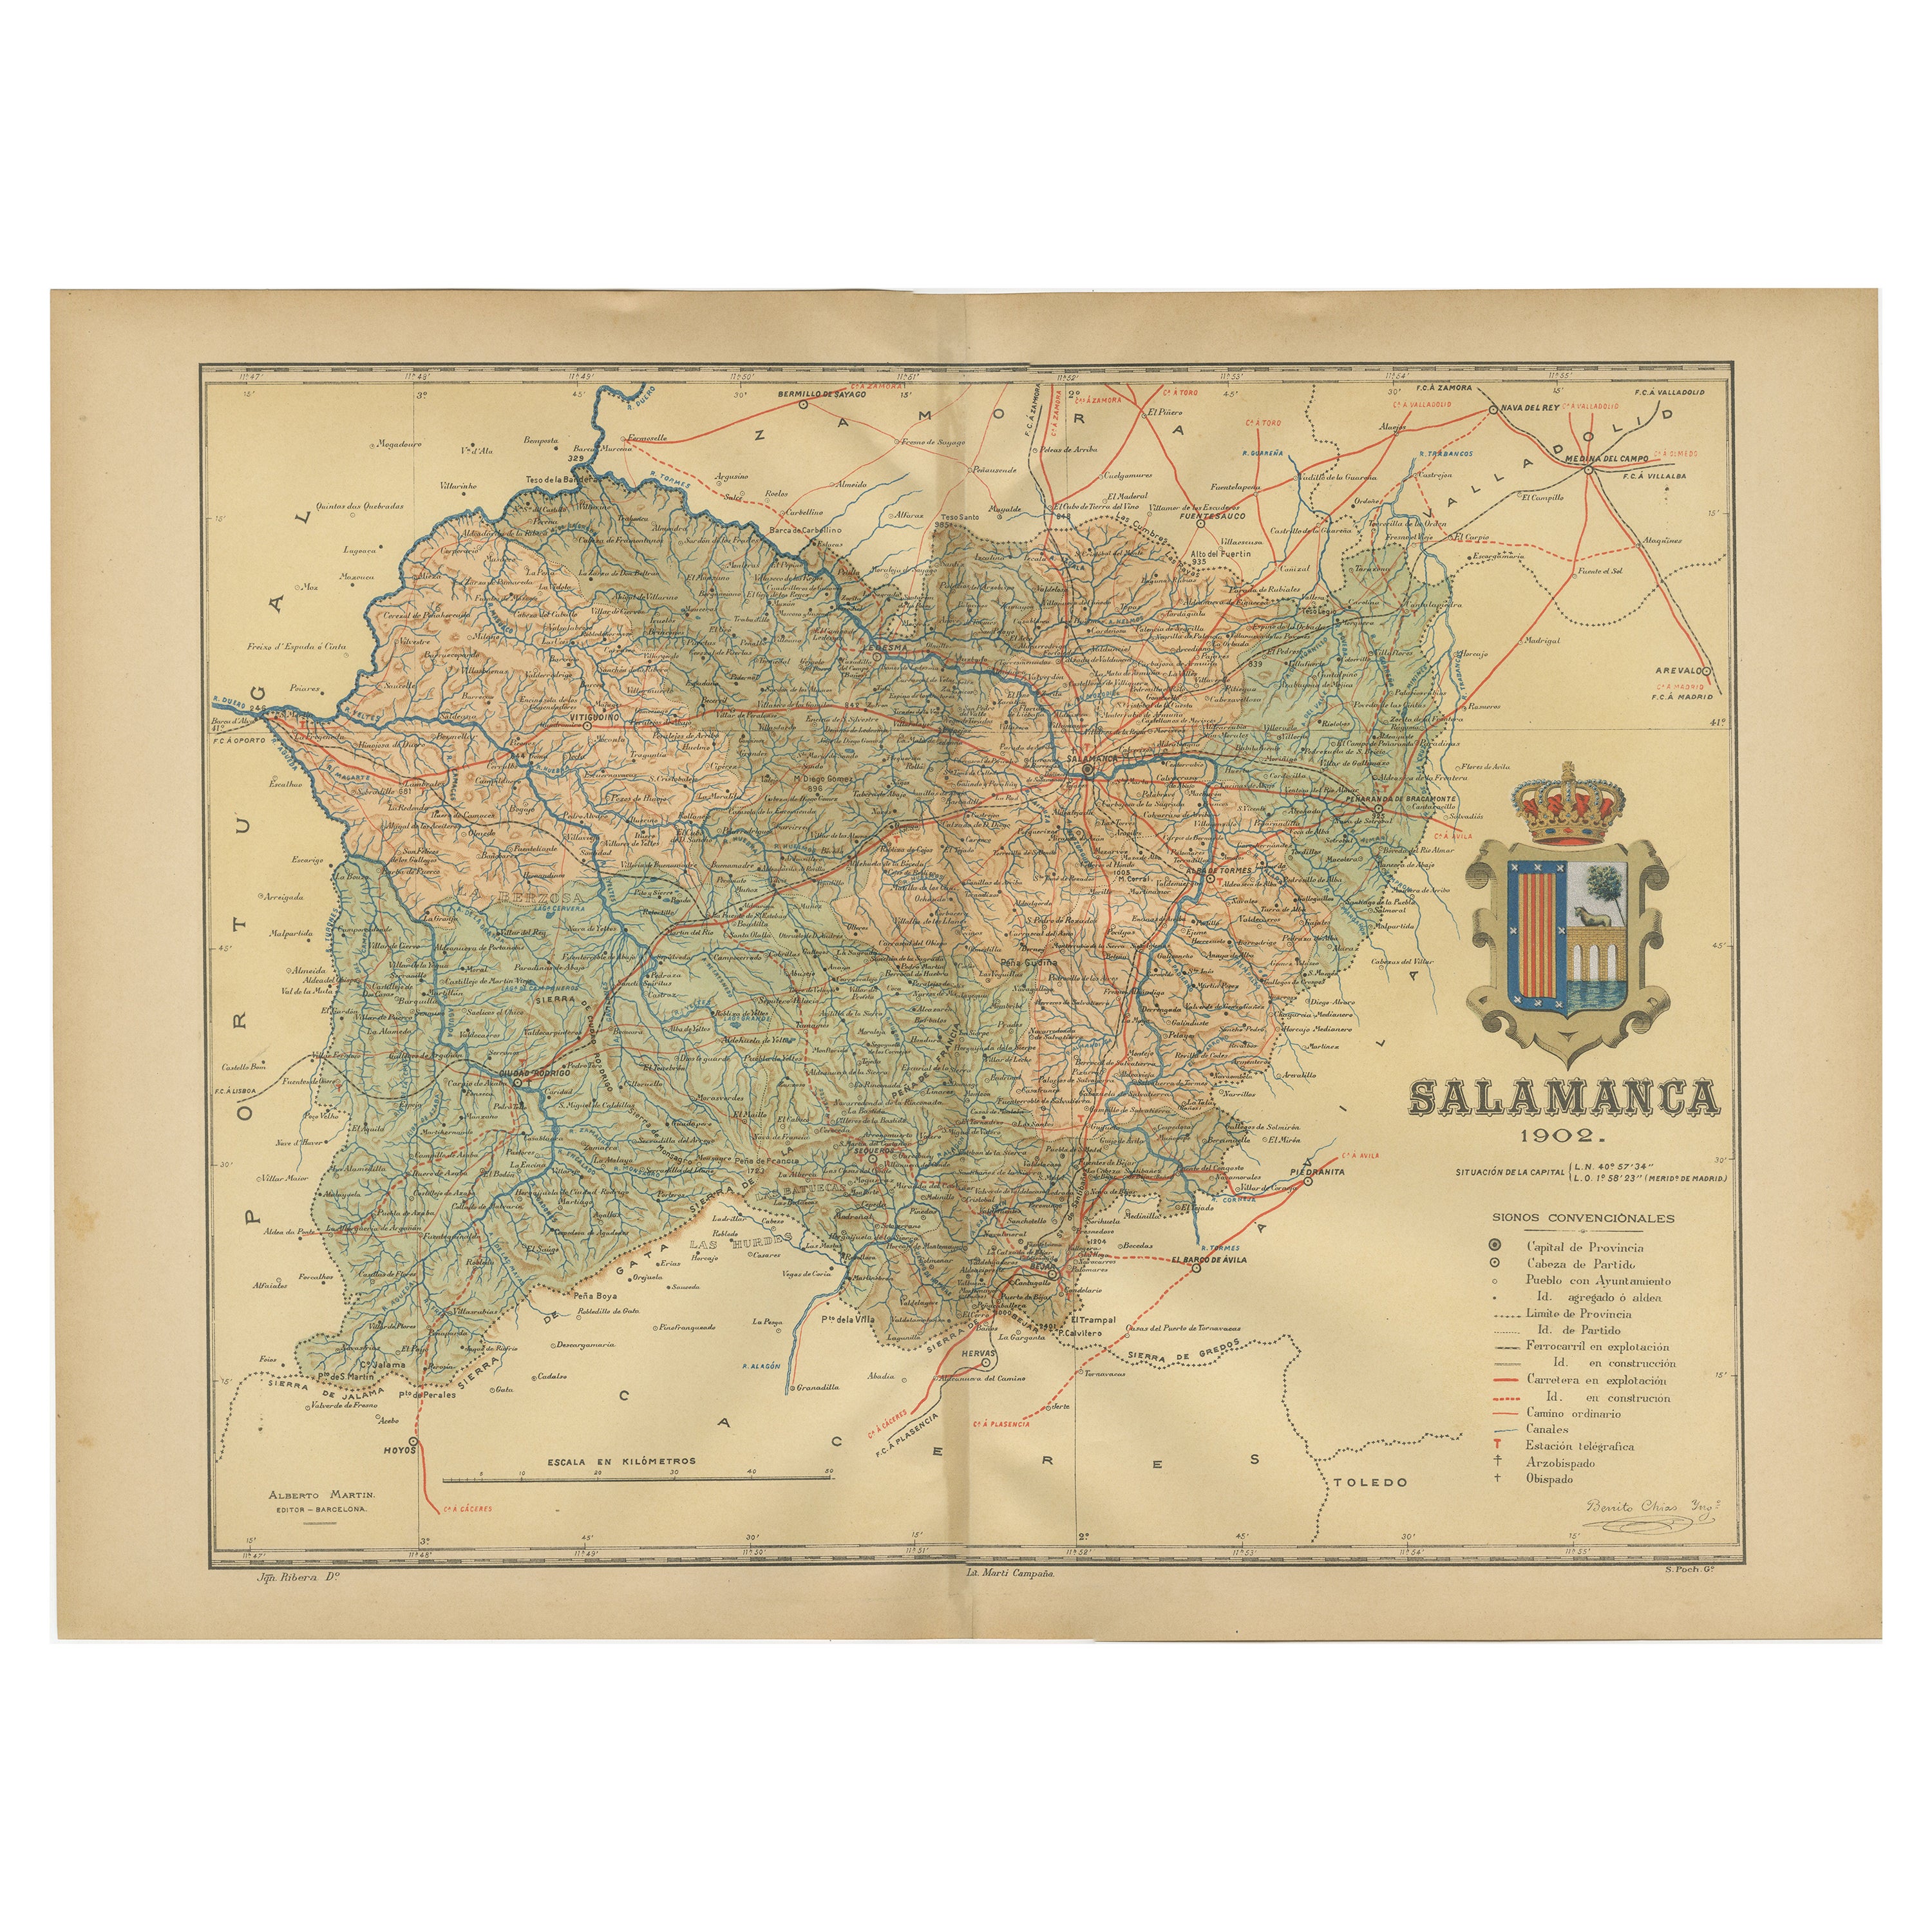 1902 Cartographic View of Salamanca: The Golden Province of Spain